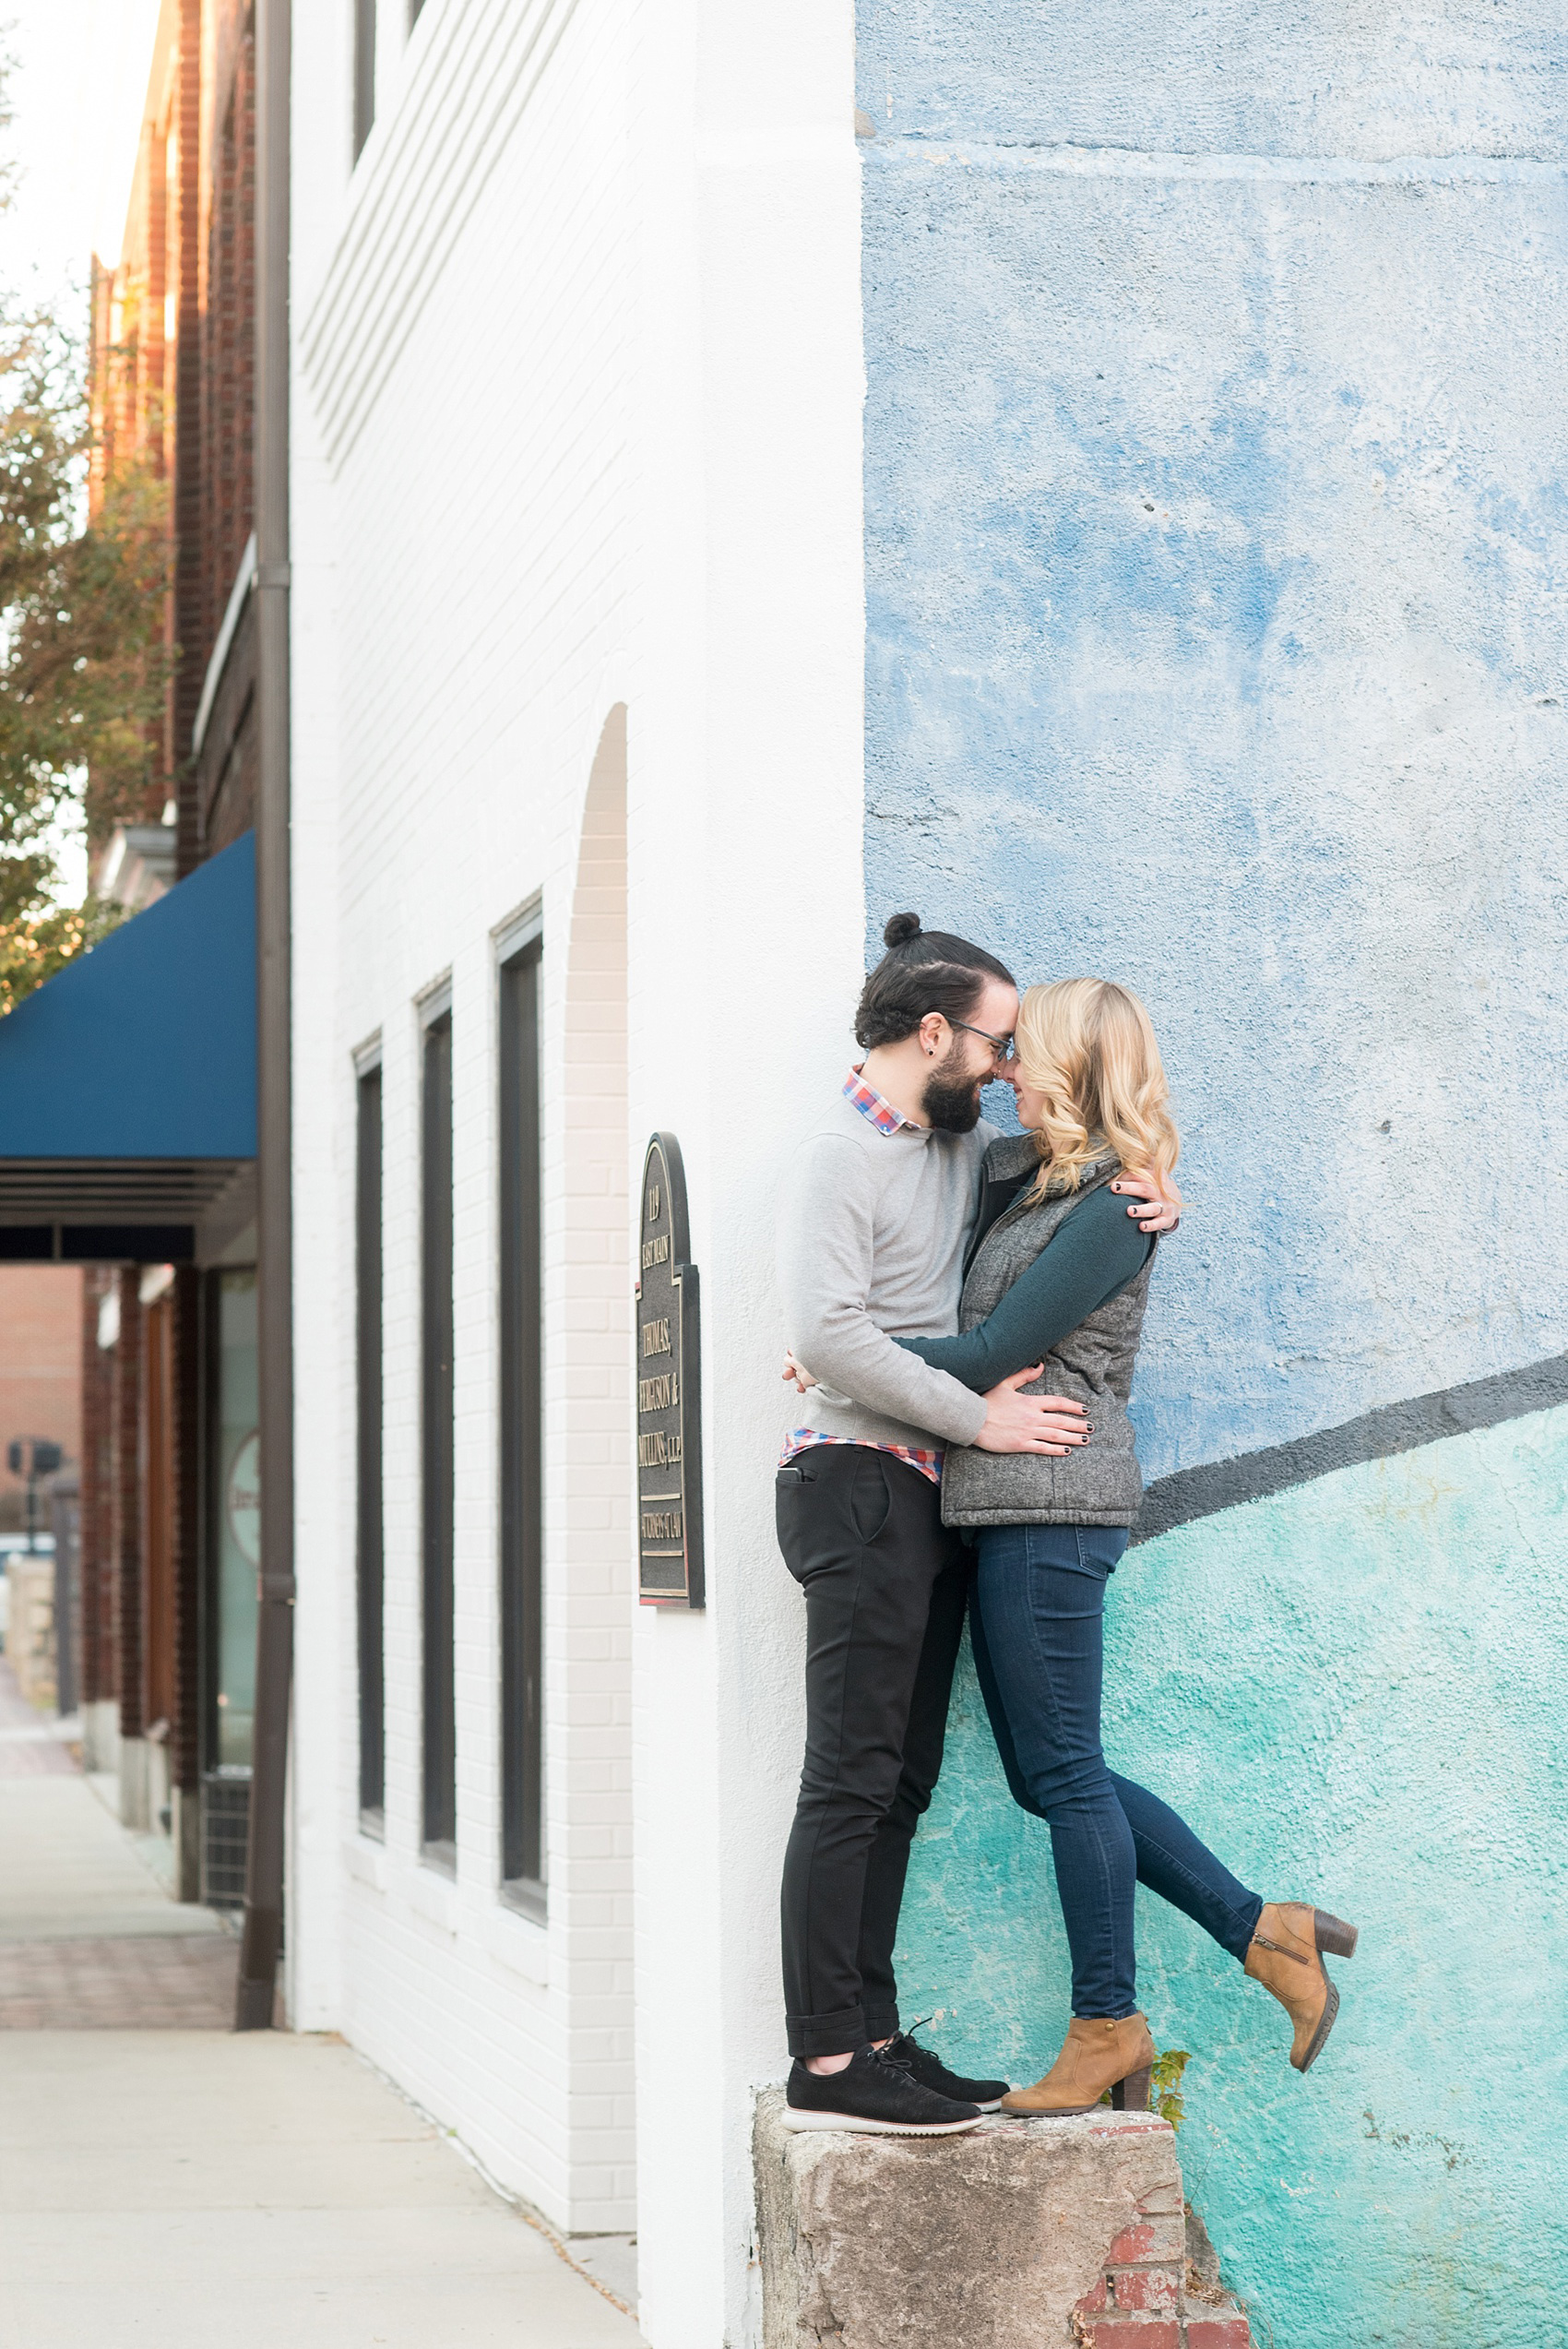 Mikkel Paige Photography photos of a Durham engagement session in downtown Durham. The couple wore cozy fall outfits.